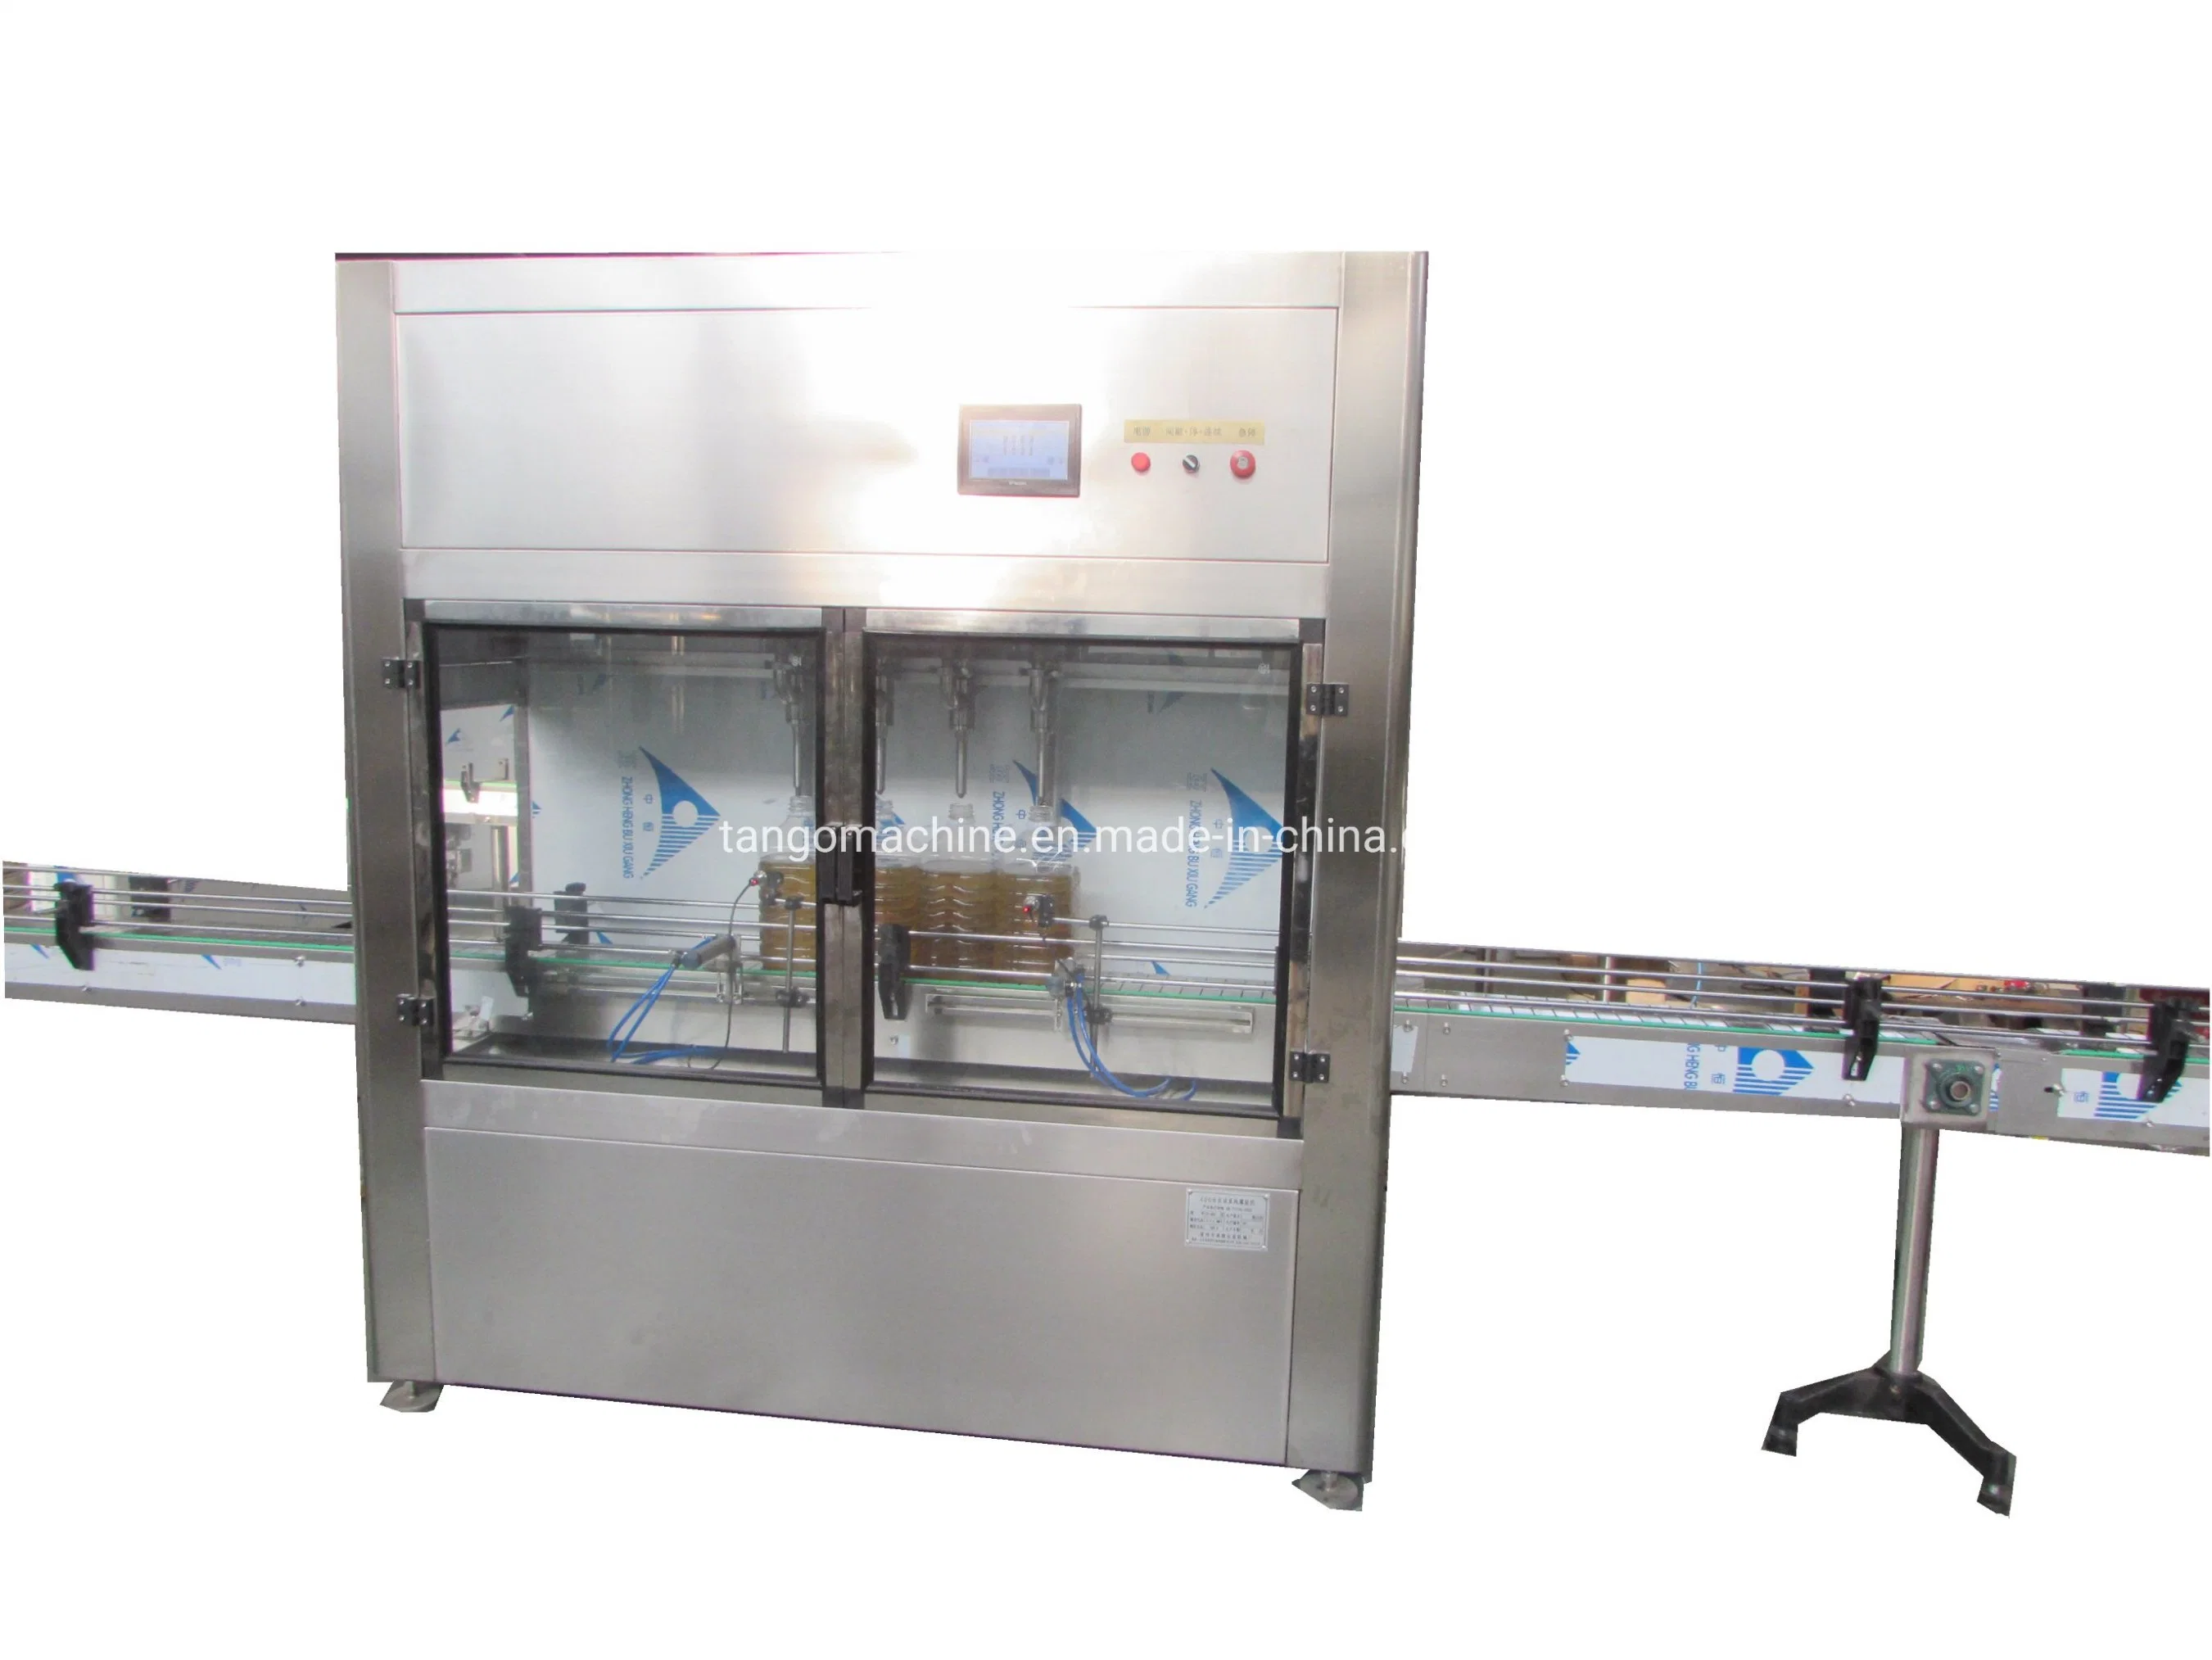 Automatic Bottle Lubricating Grease Filling Machine